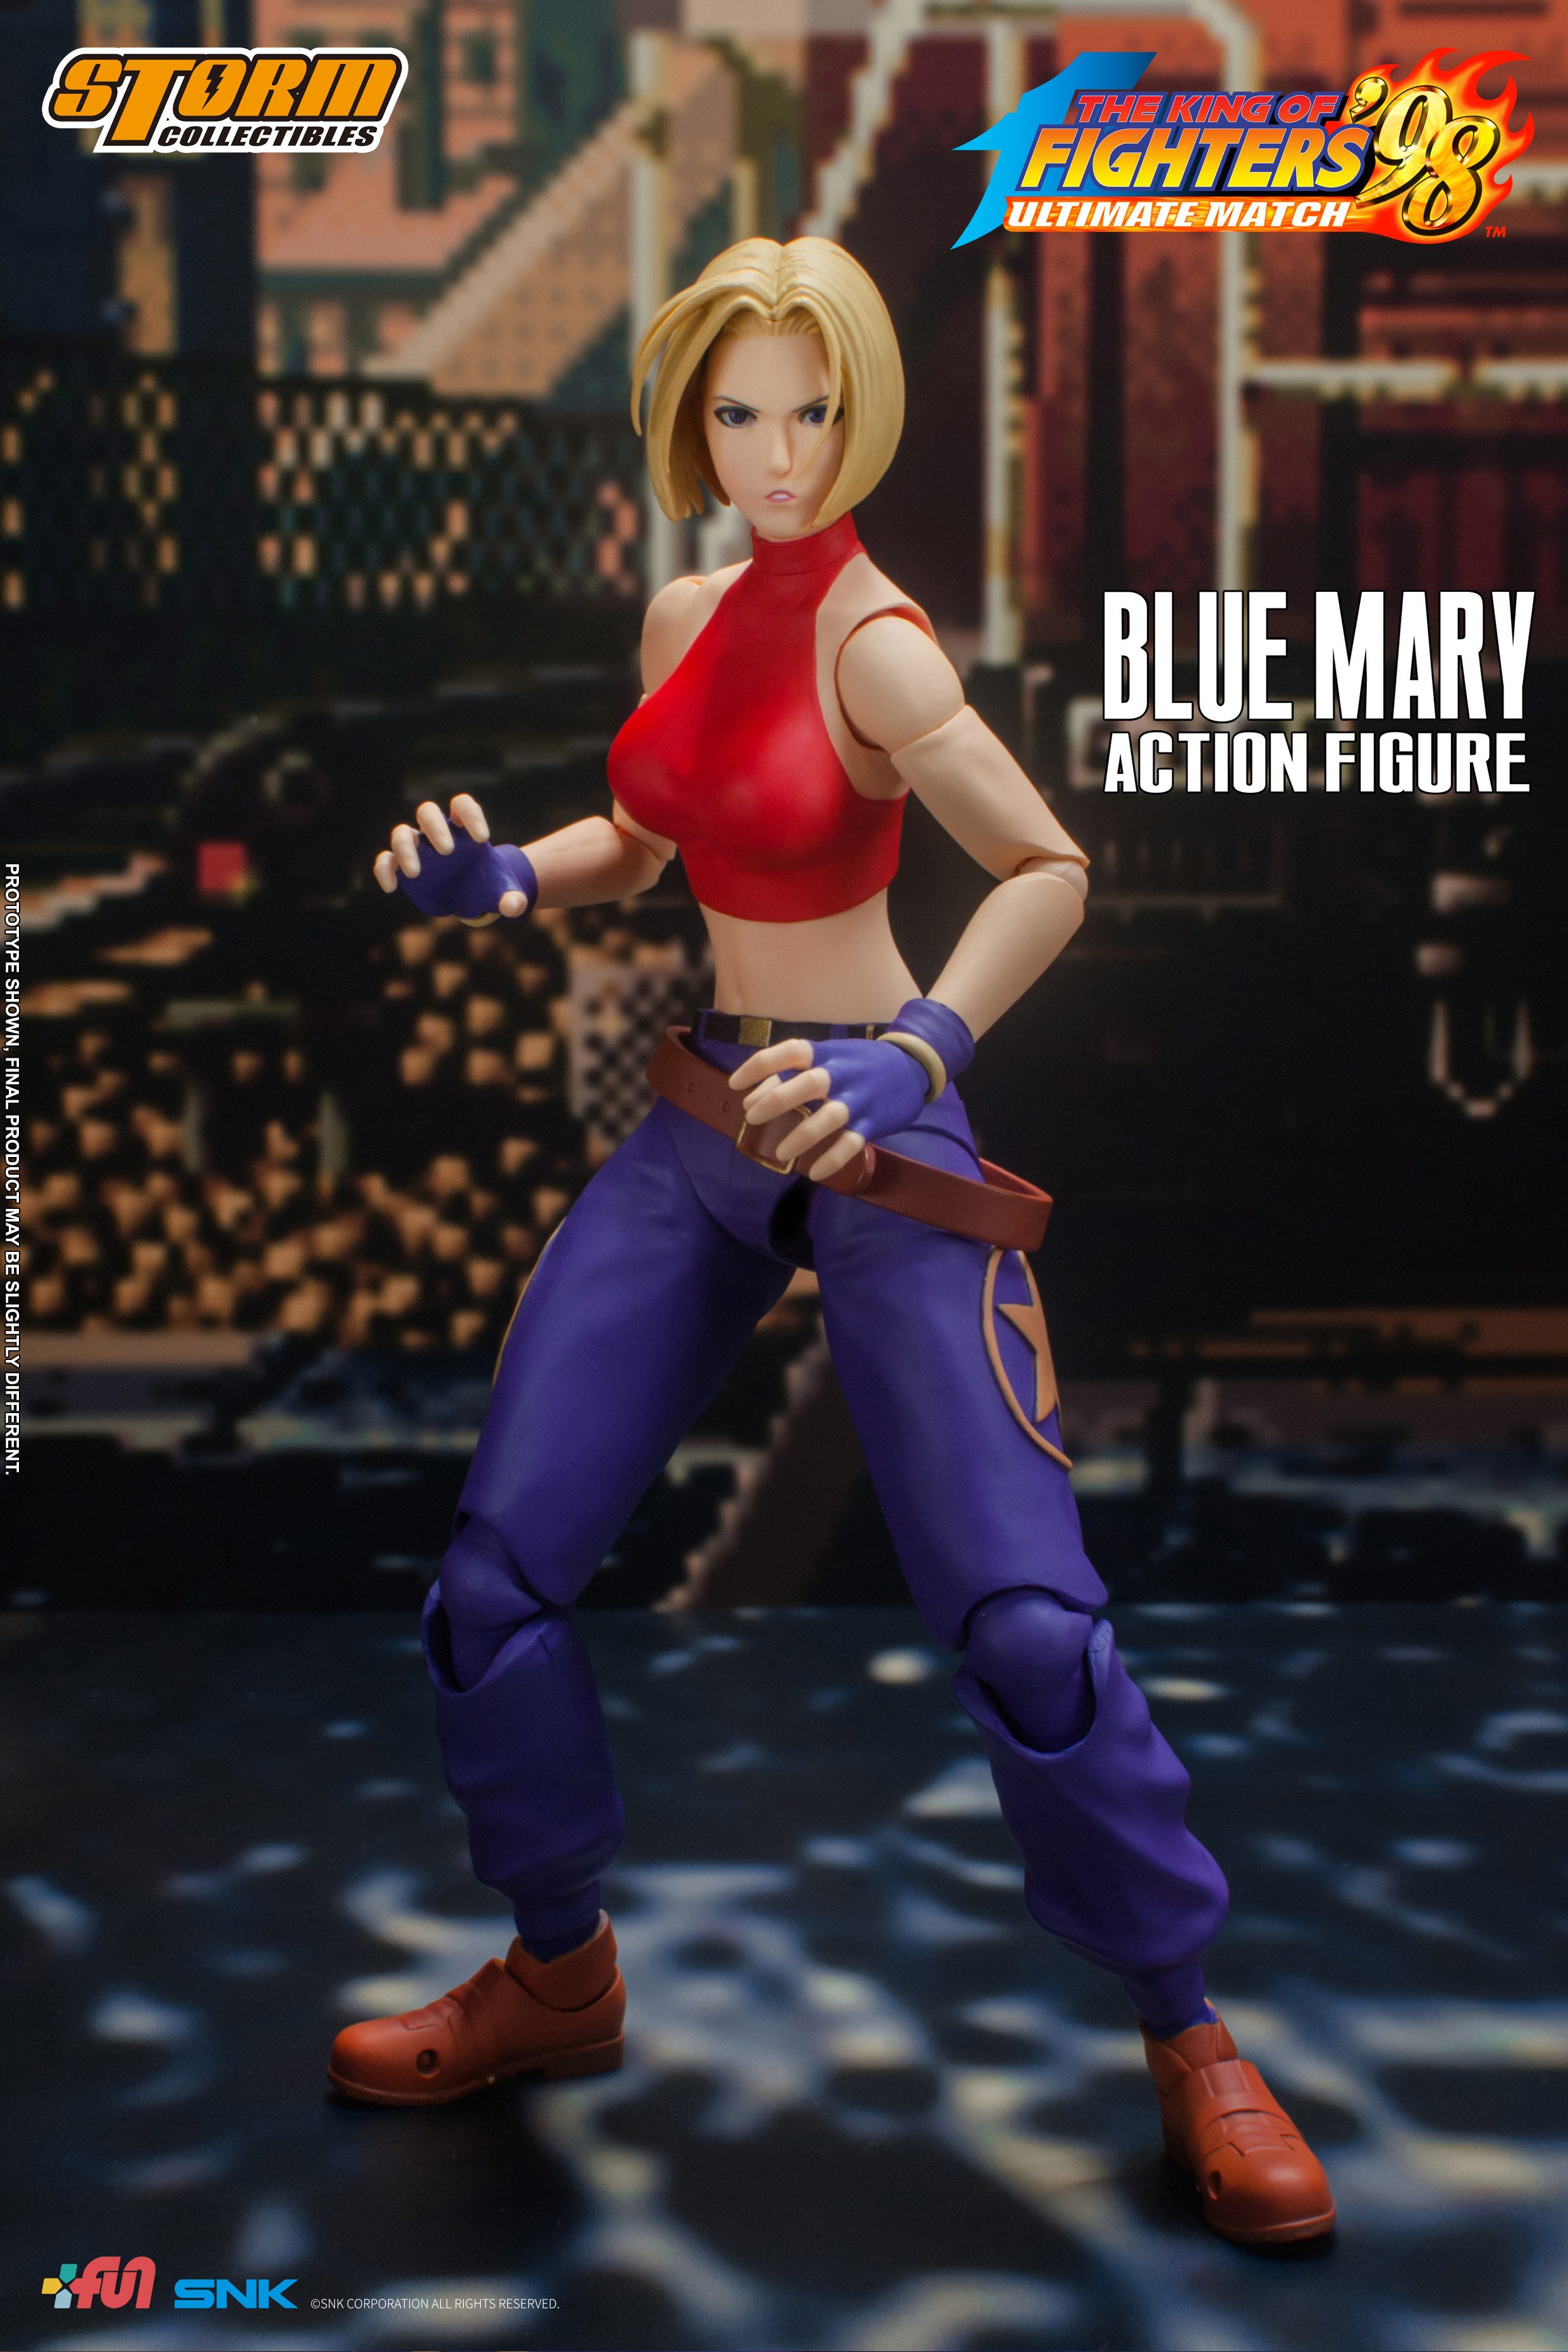 Storm Collectibles Actionfigur STORM COLLECTIBLES KING OF FIGHTERS 98 BLUE MARY 1/12 ACTIONFIGUR